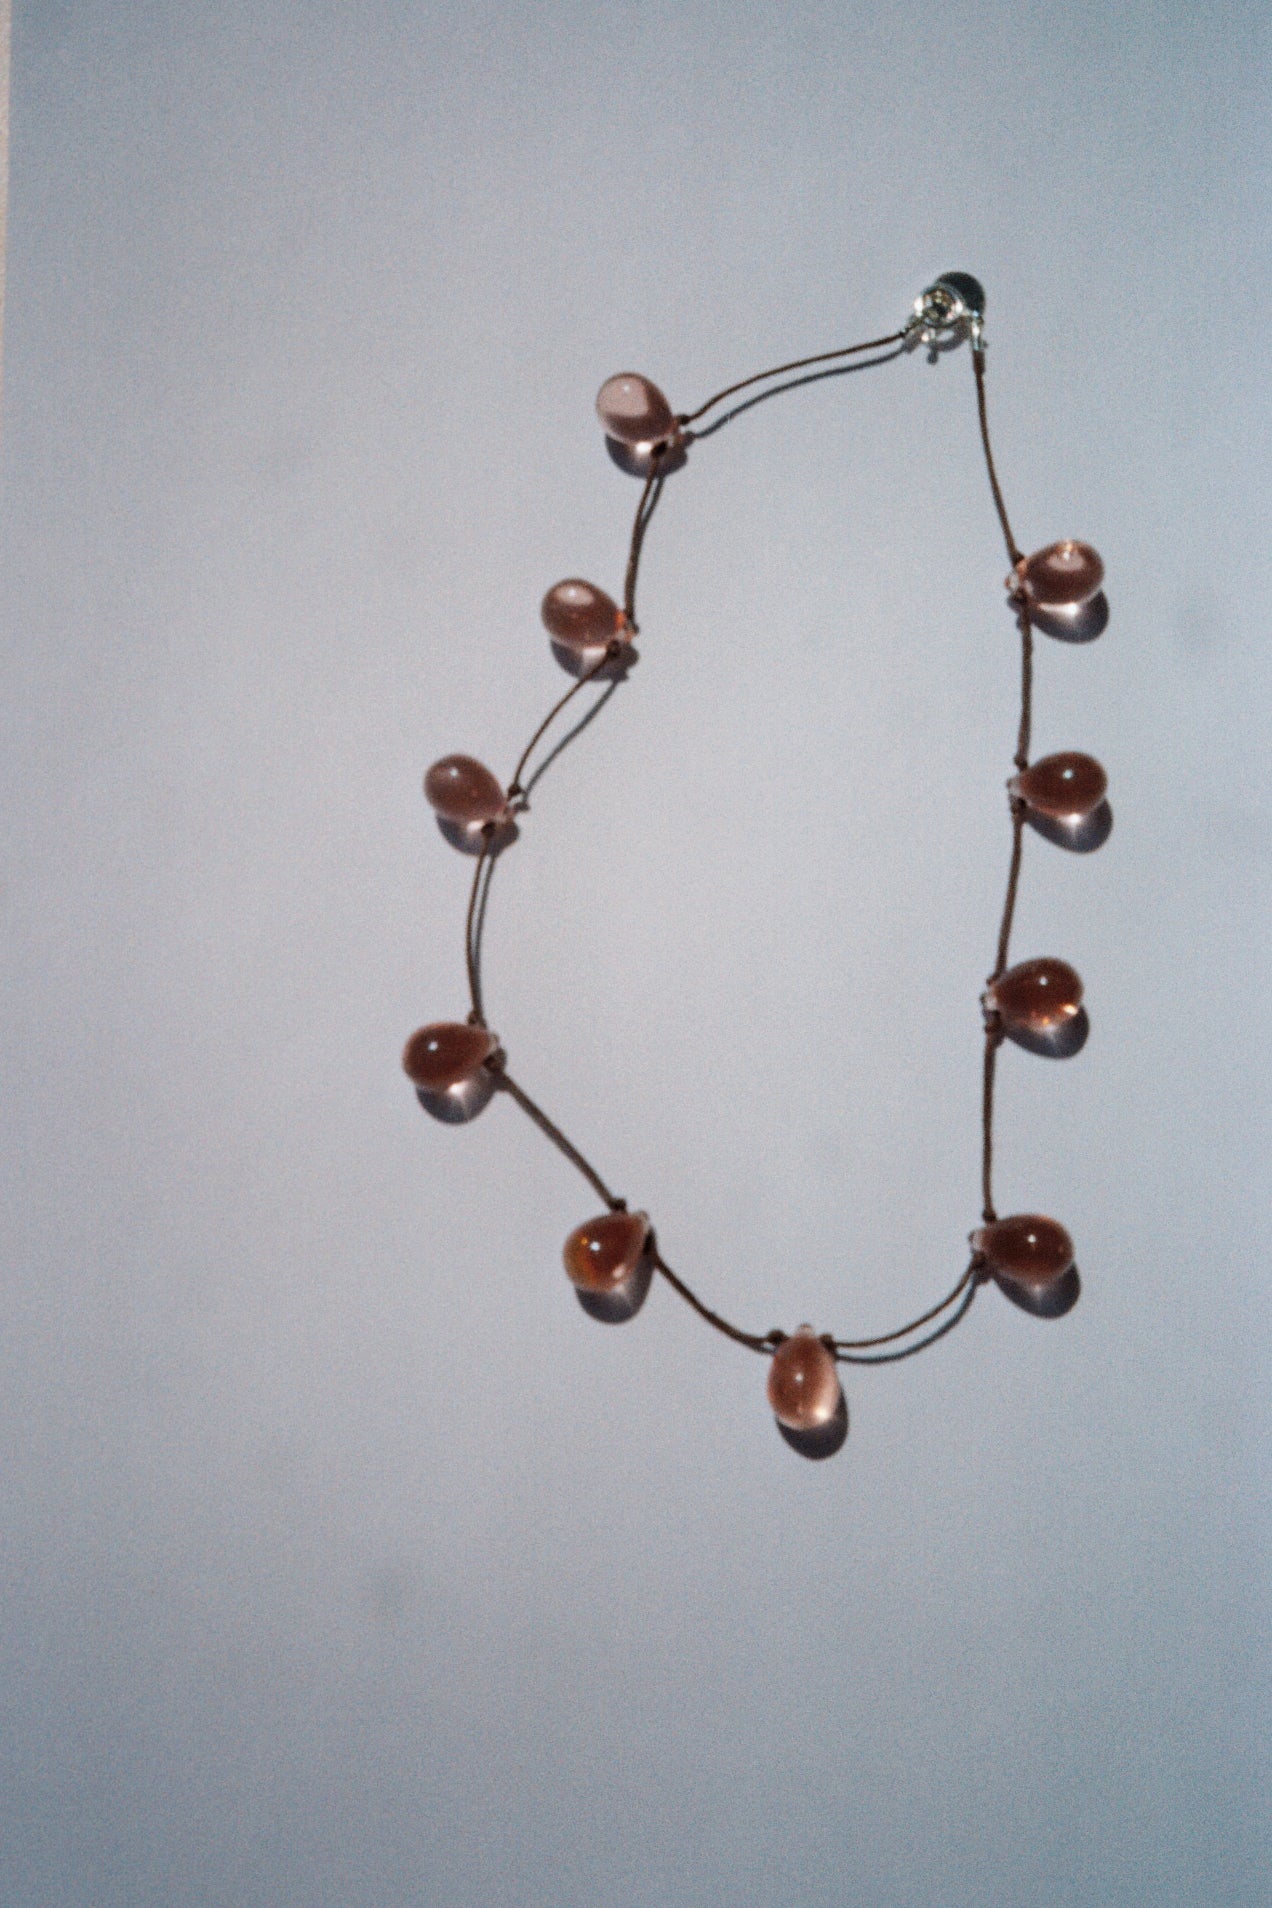 Noué necklace - Pink / Chocolate cord